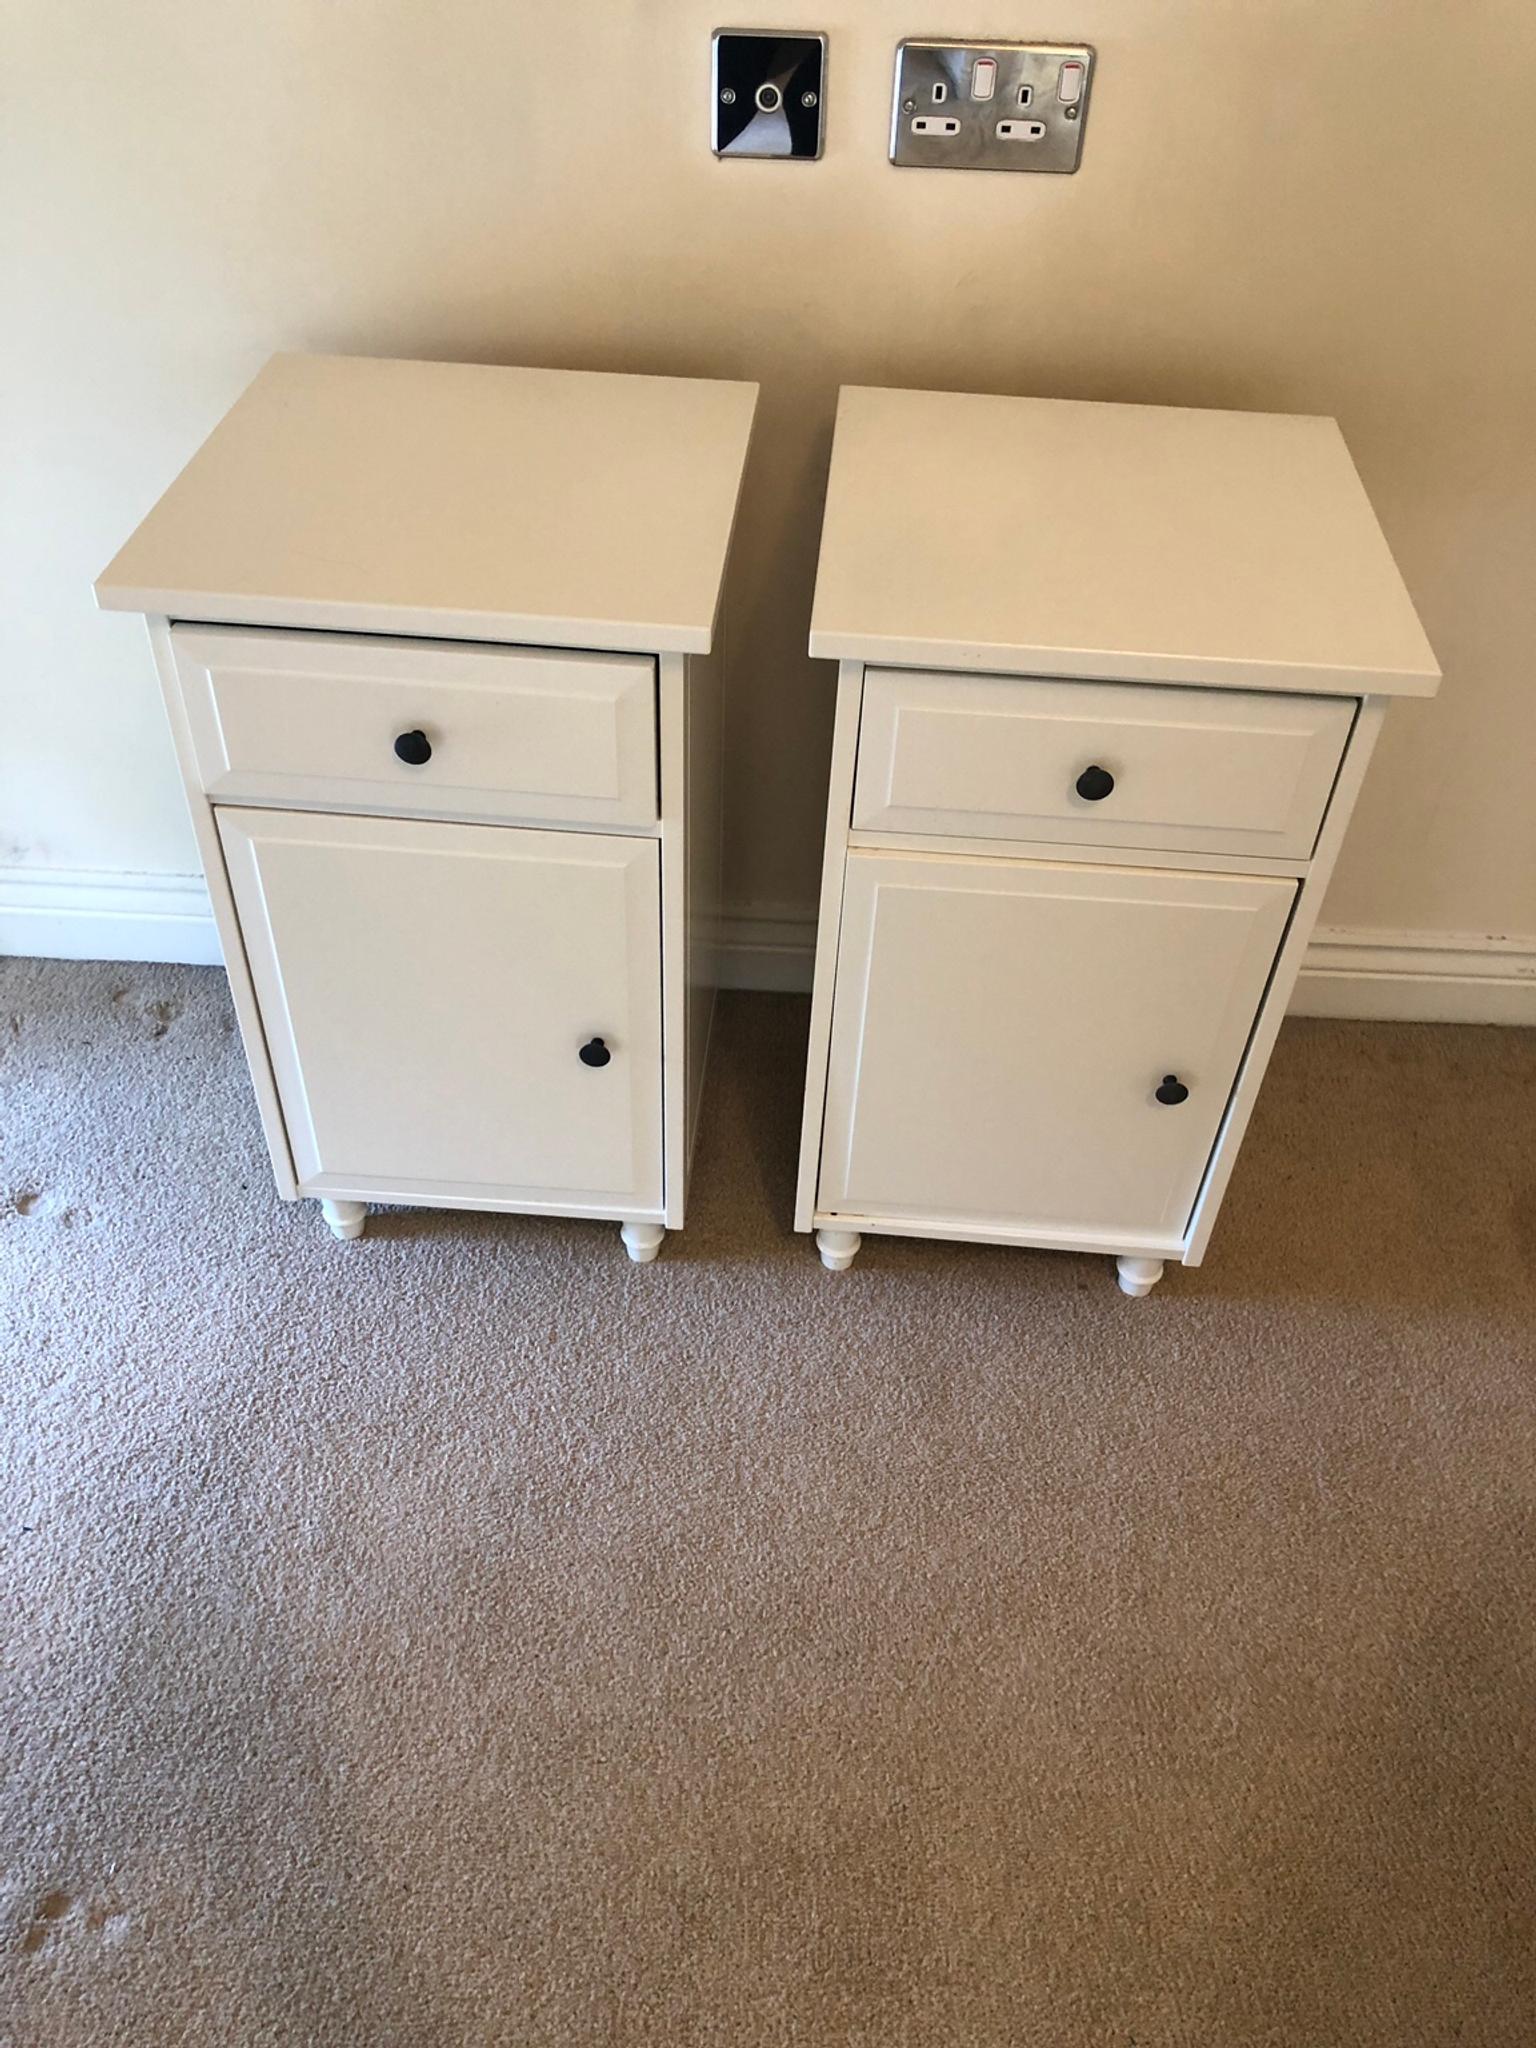 Pair Of Cream Bedside Cabinets In La1 Lancaster For 30 00 For